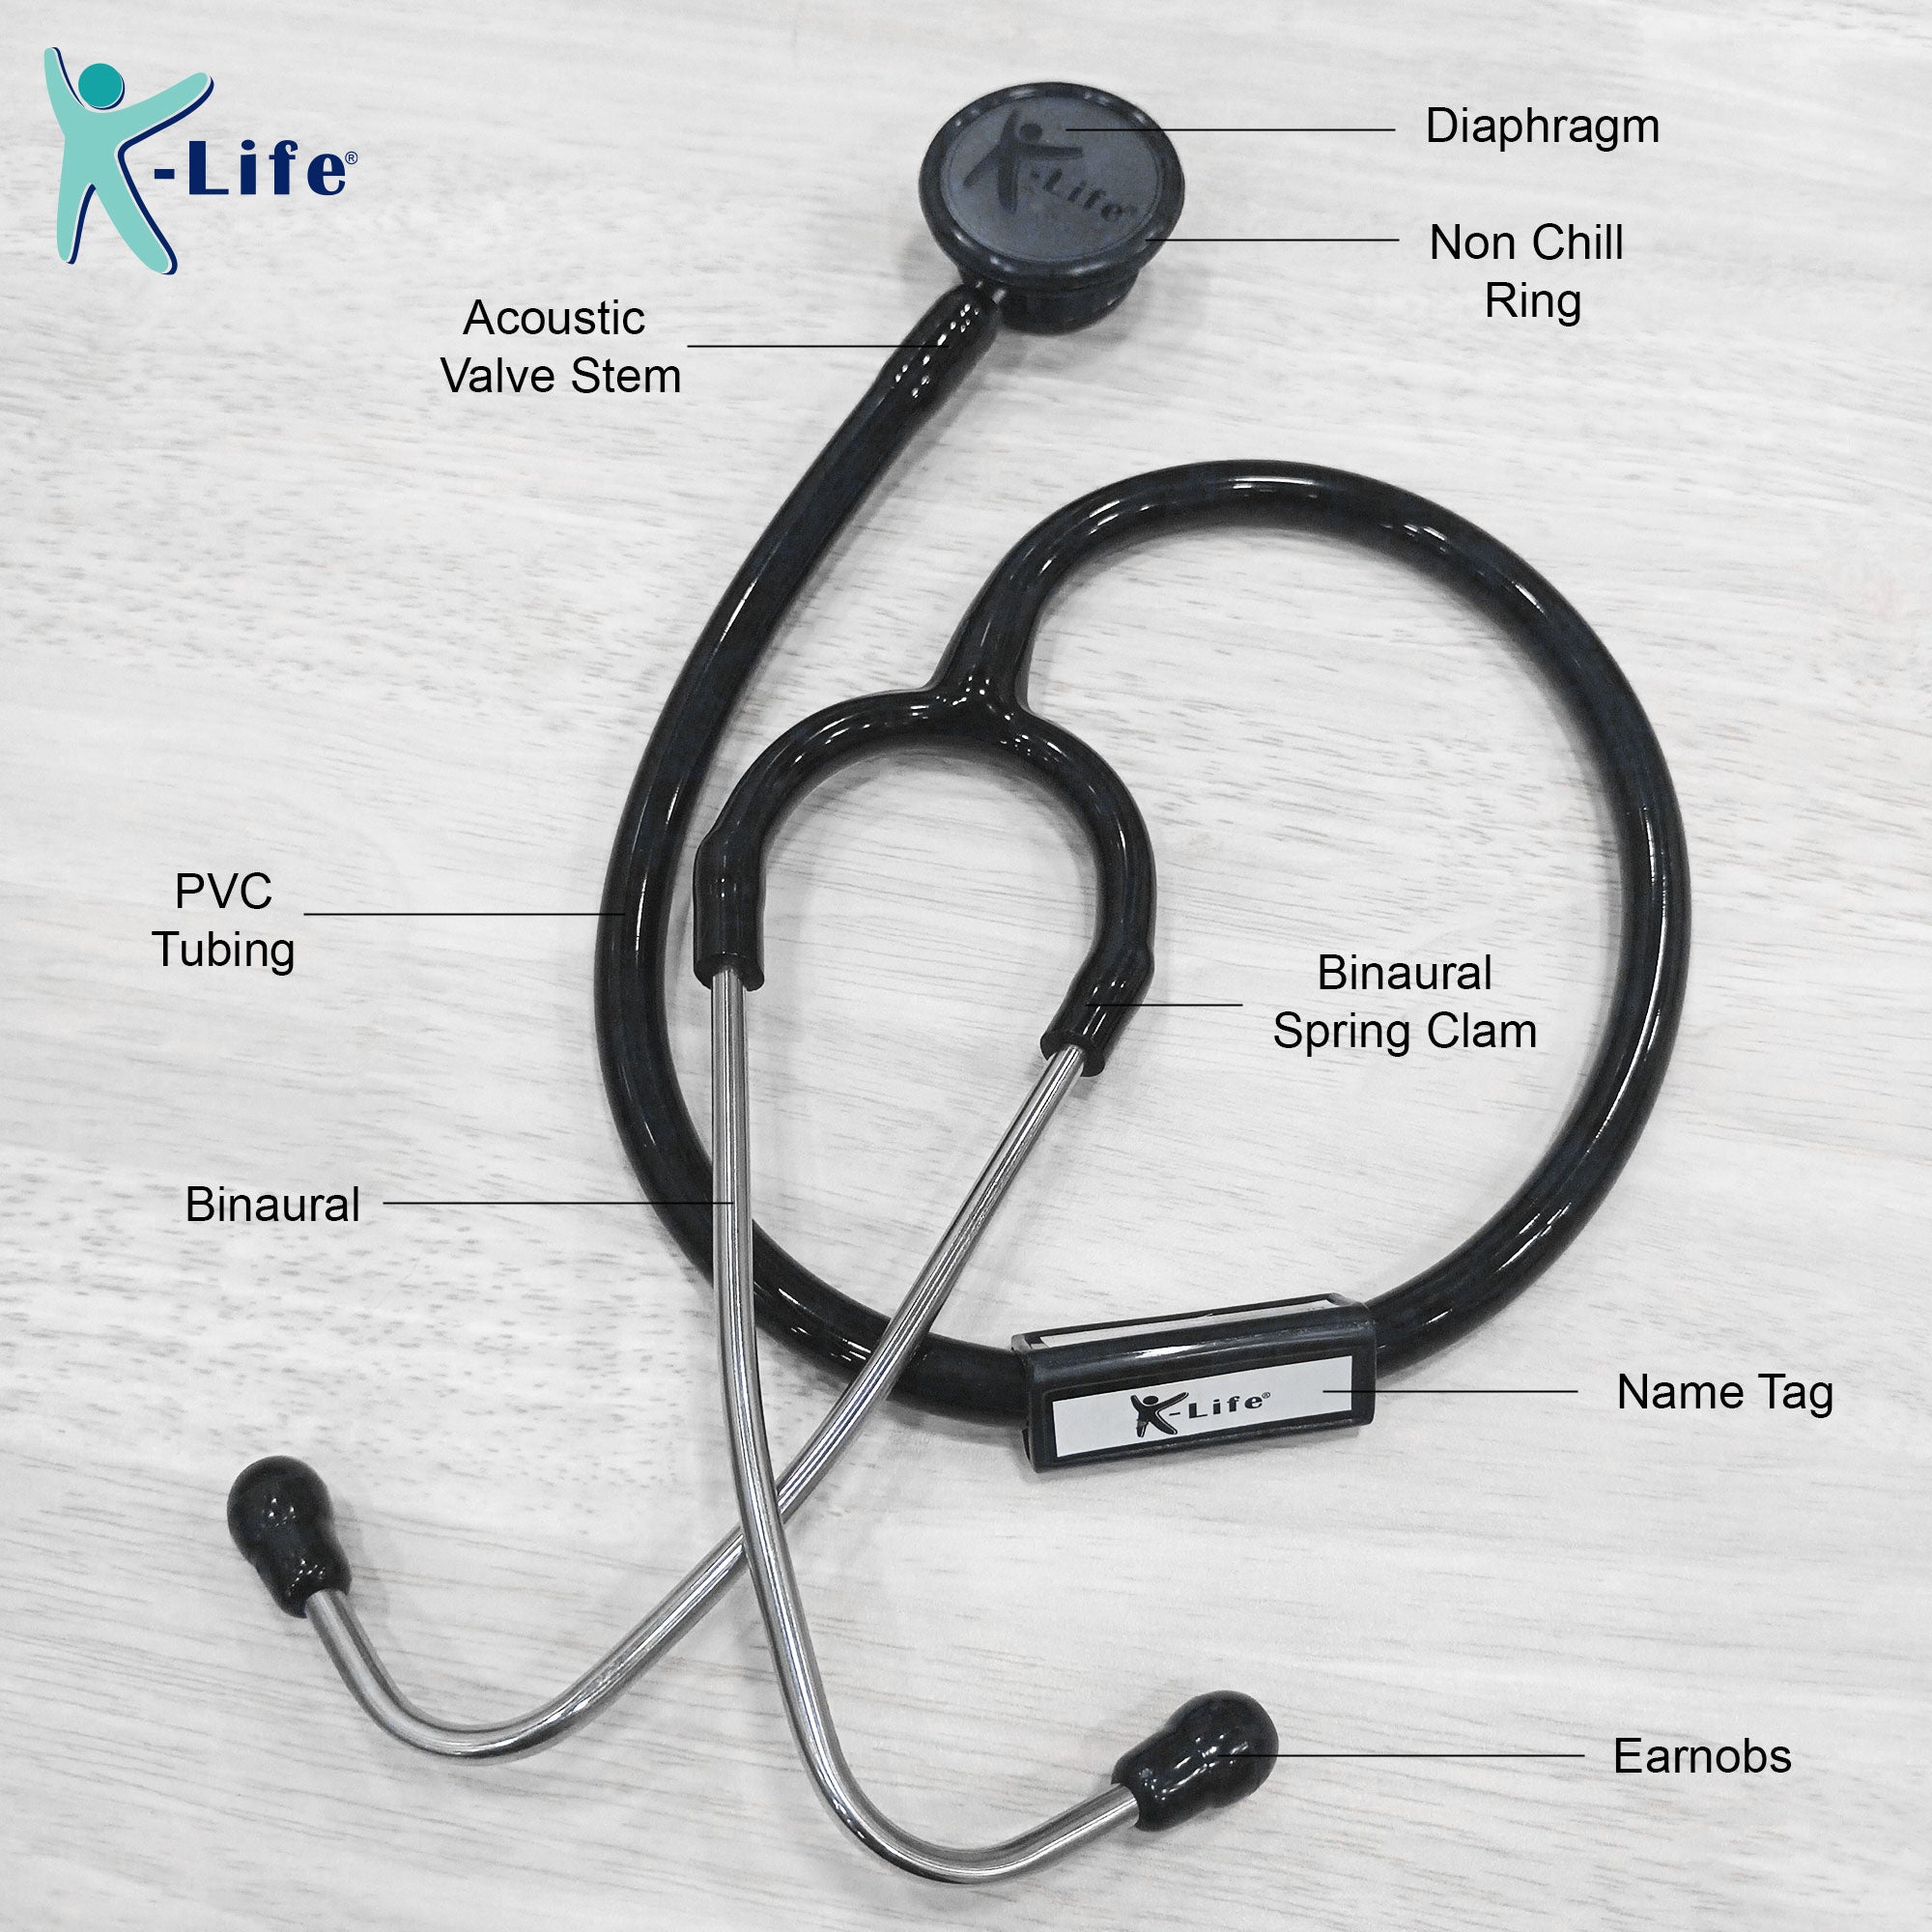 K-life ST-101 Professional Single head Chest Piece for medical students nurses doctors Acoustic Stethoscope